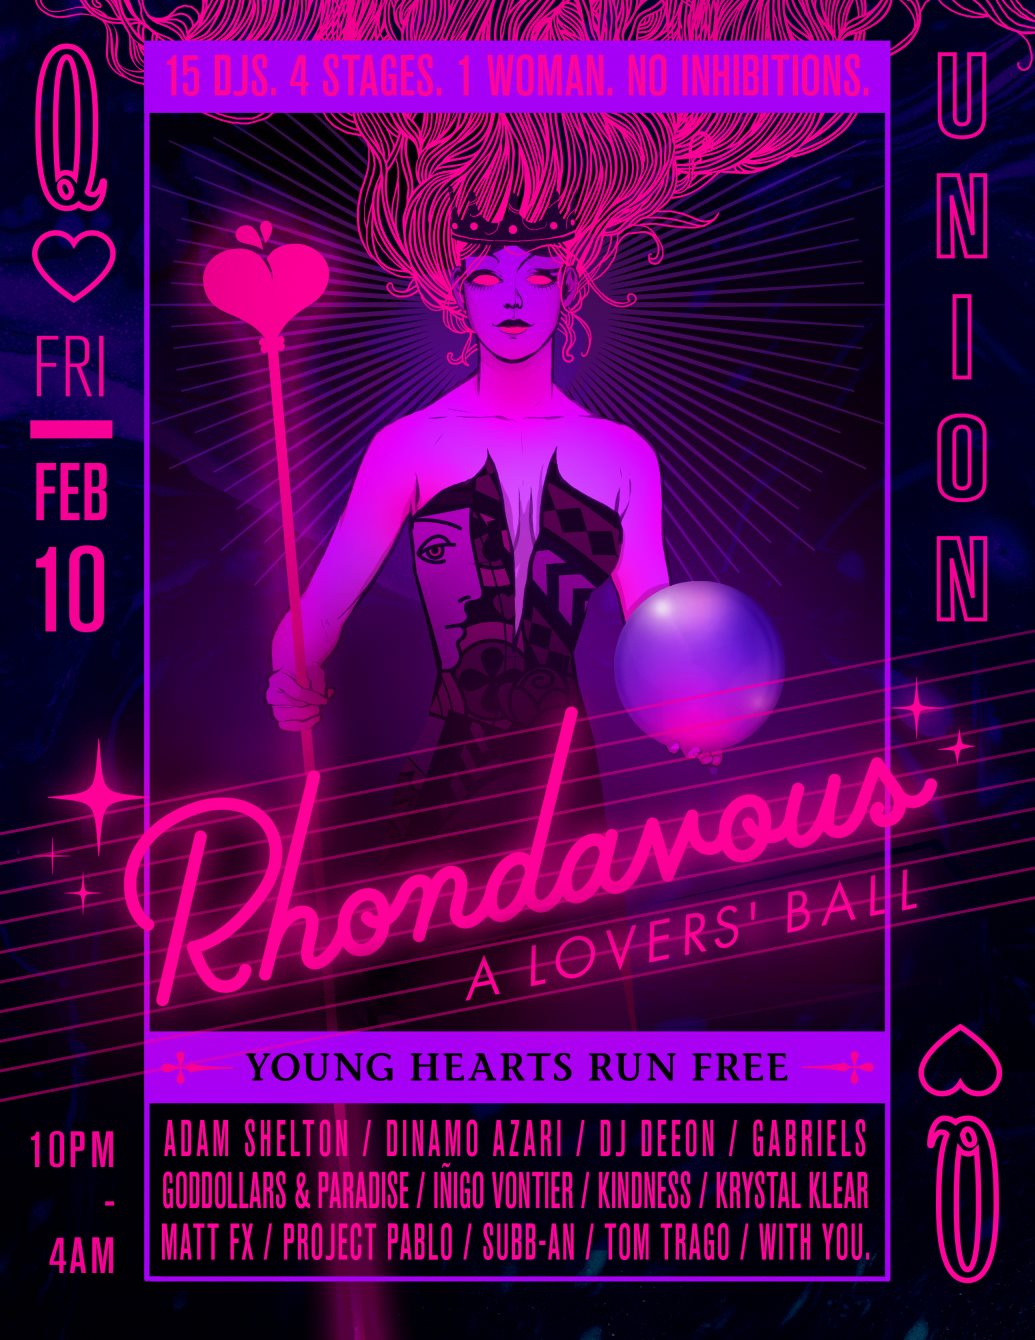 Rhondavous: A Lover's Ball - Flyer front